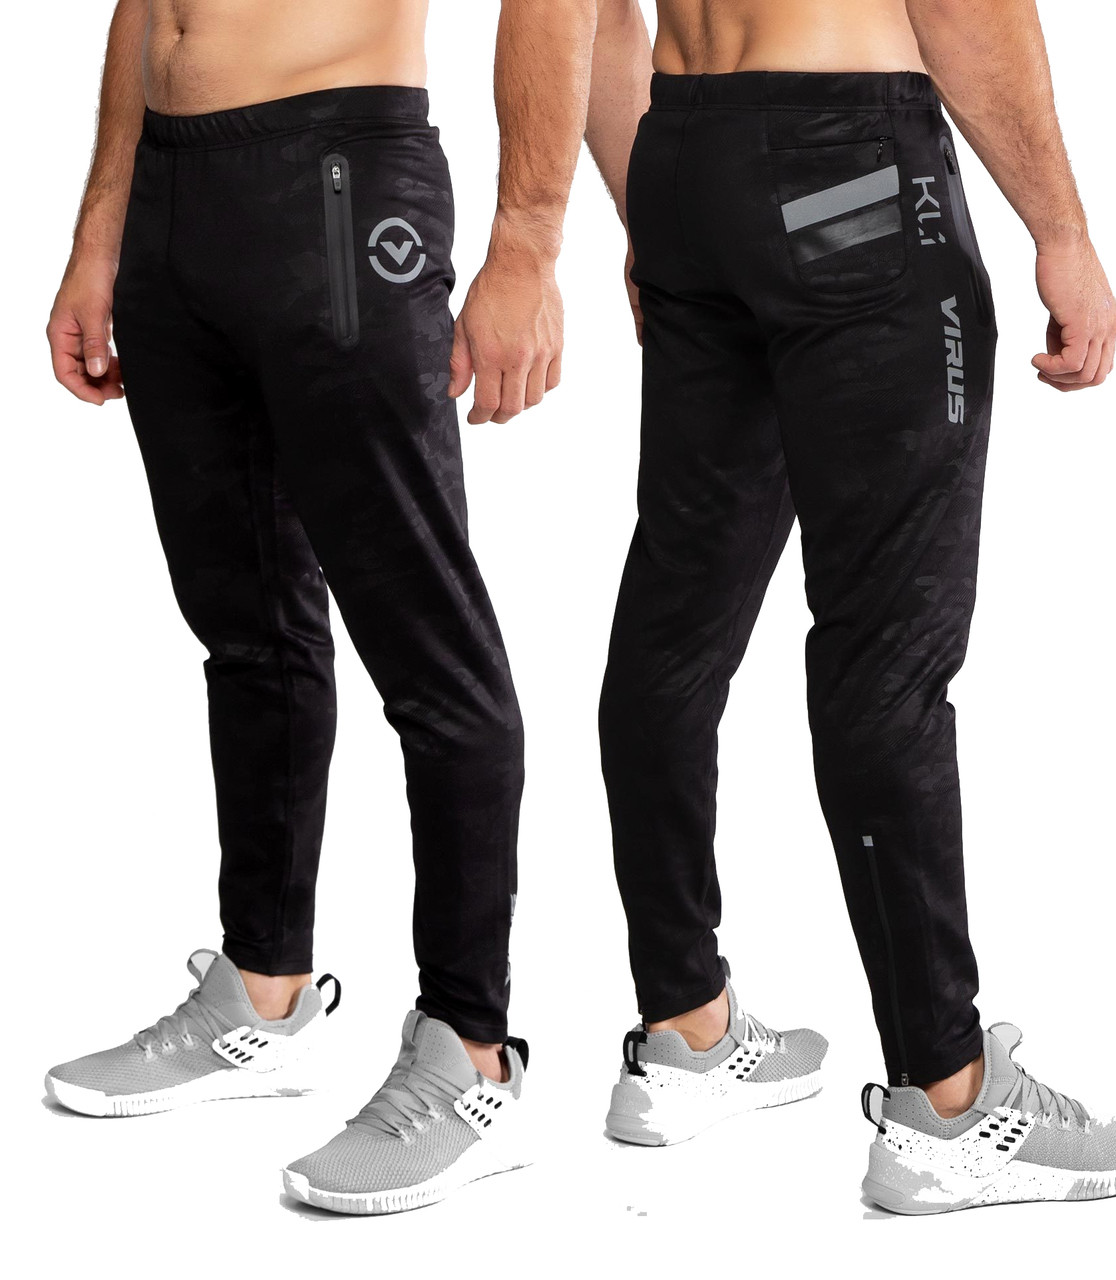 offers Virus KL1 Active Recovery Pant (Au15) BLACK CAMO  Cheaper - Sold at preferential prices